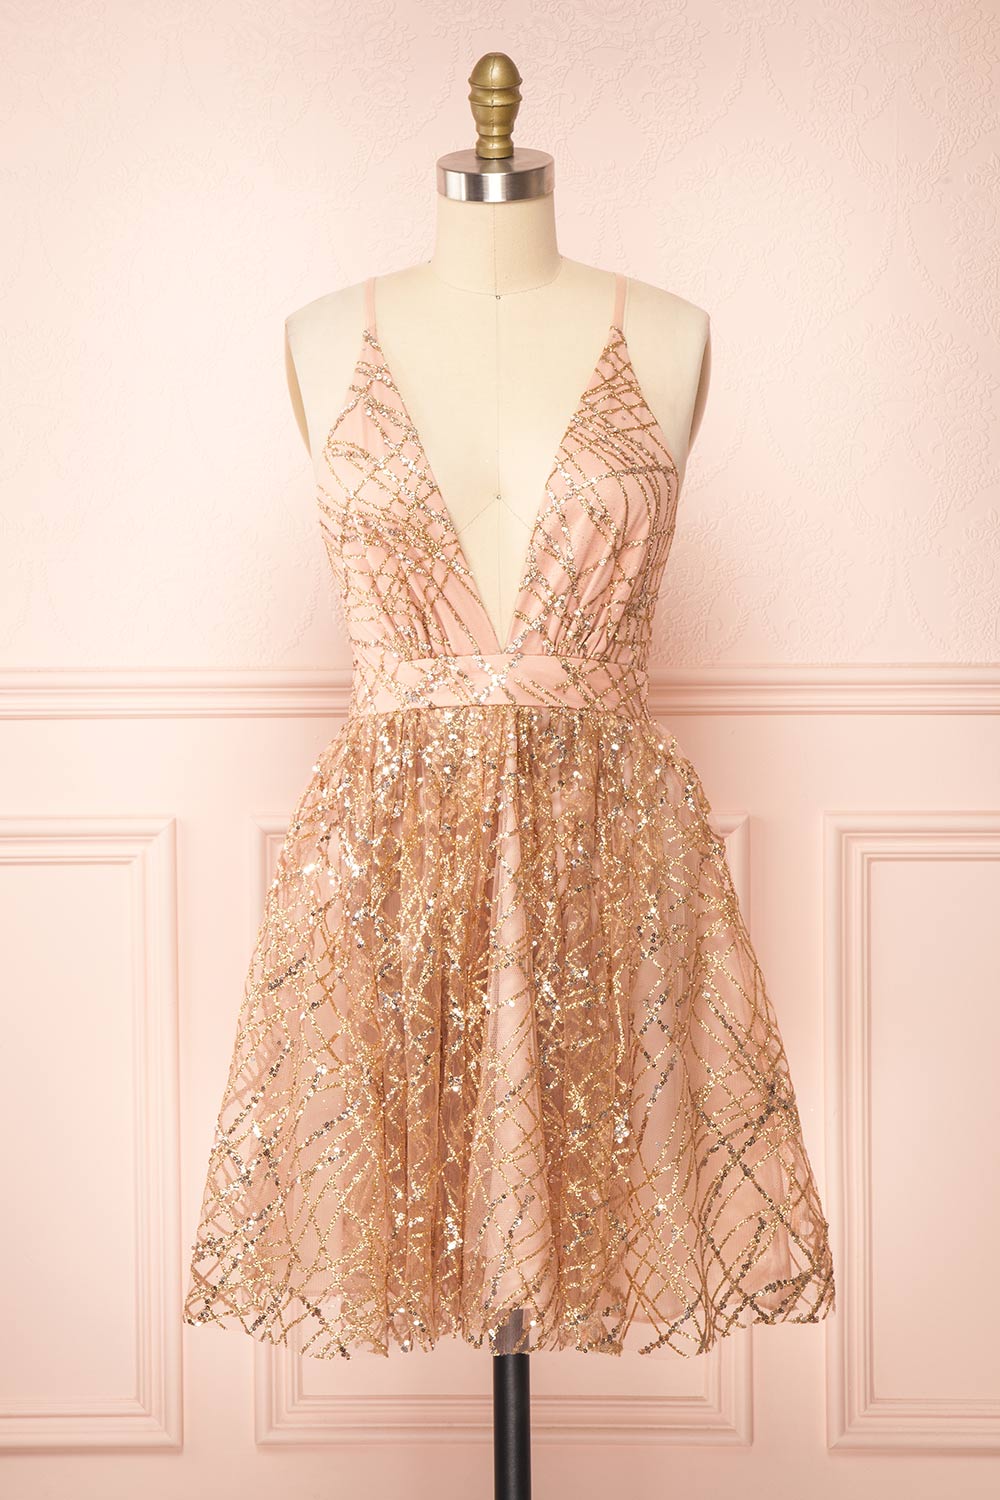 Astral Rose Gold Backless Short Sequin Dress | Boutique 1861 front view